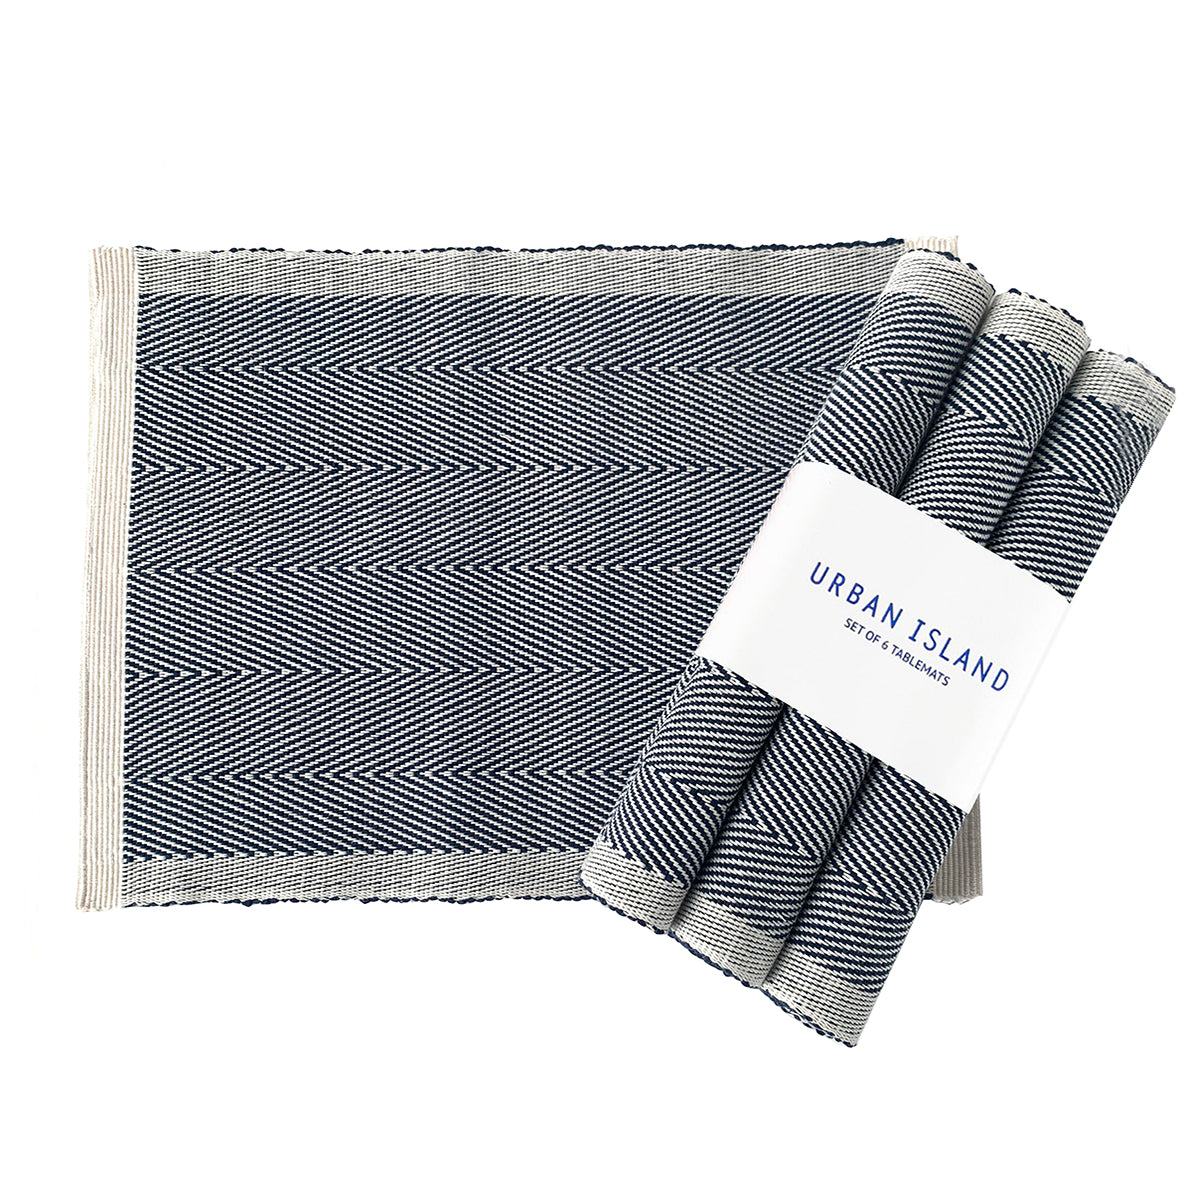 Handwoven Placemat - Specks – Raw & Mid grey with Black